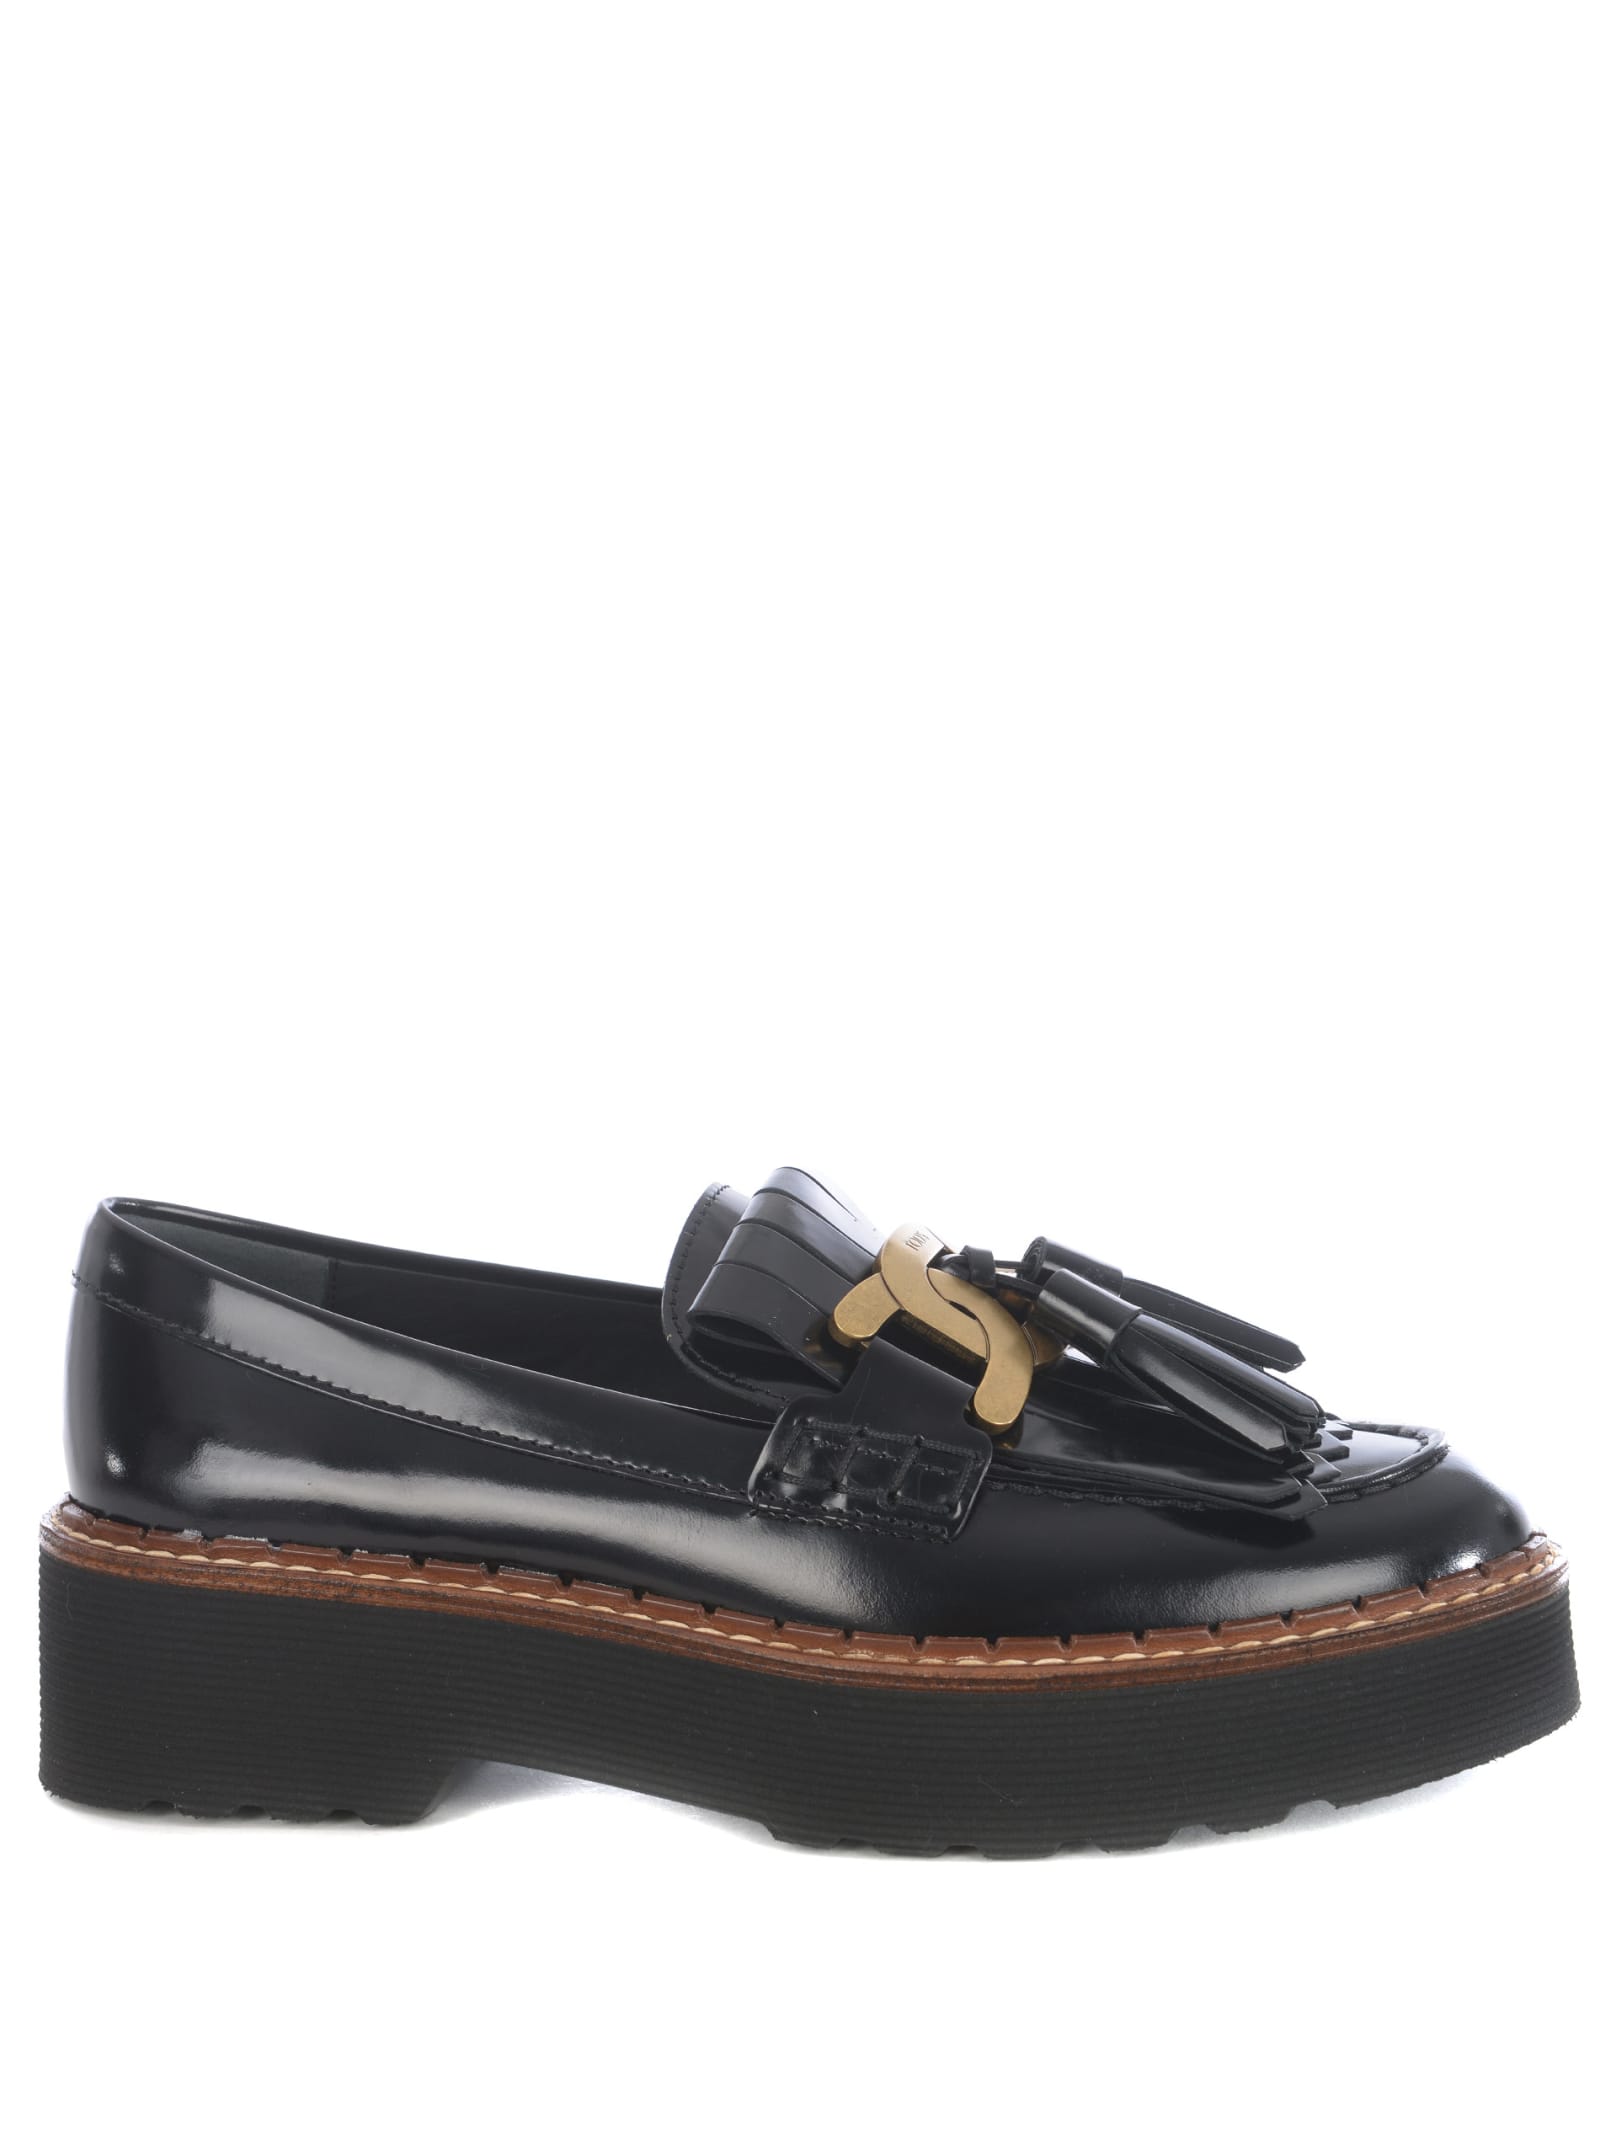 TOD'S FLAT SHOES,11524264